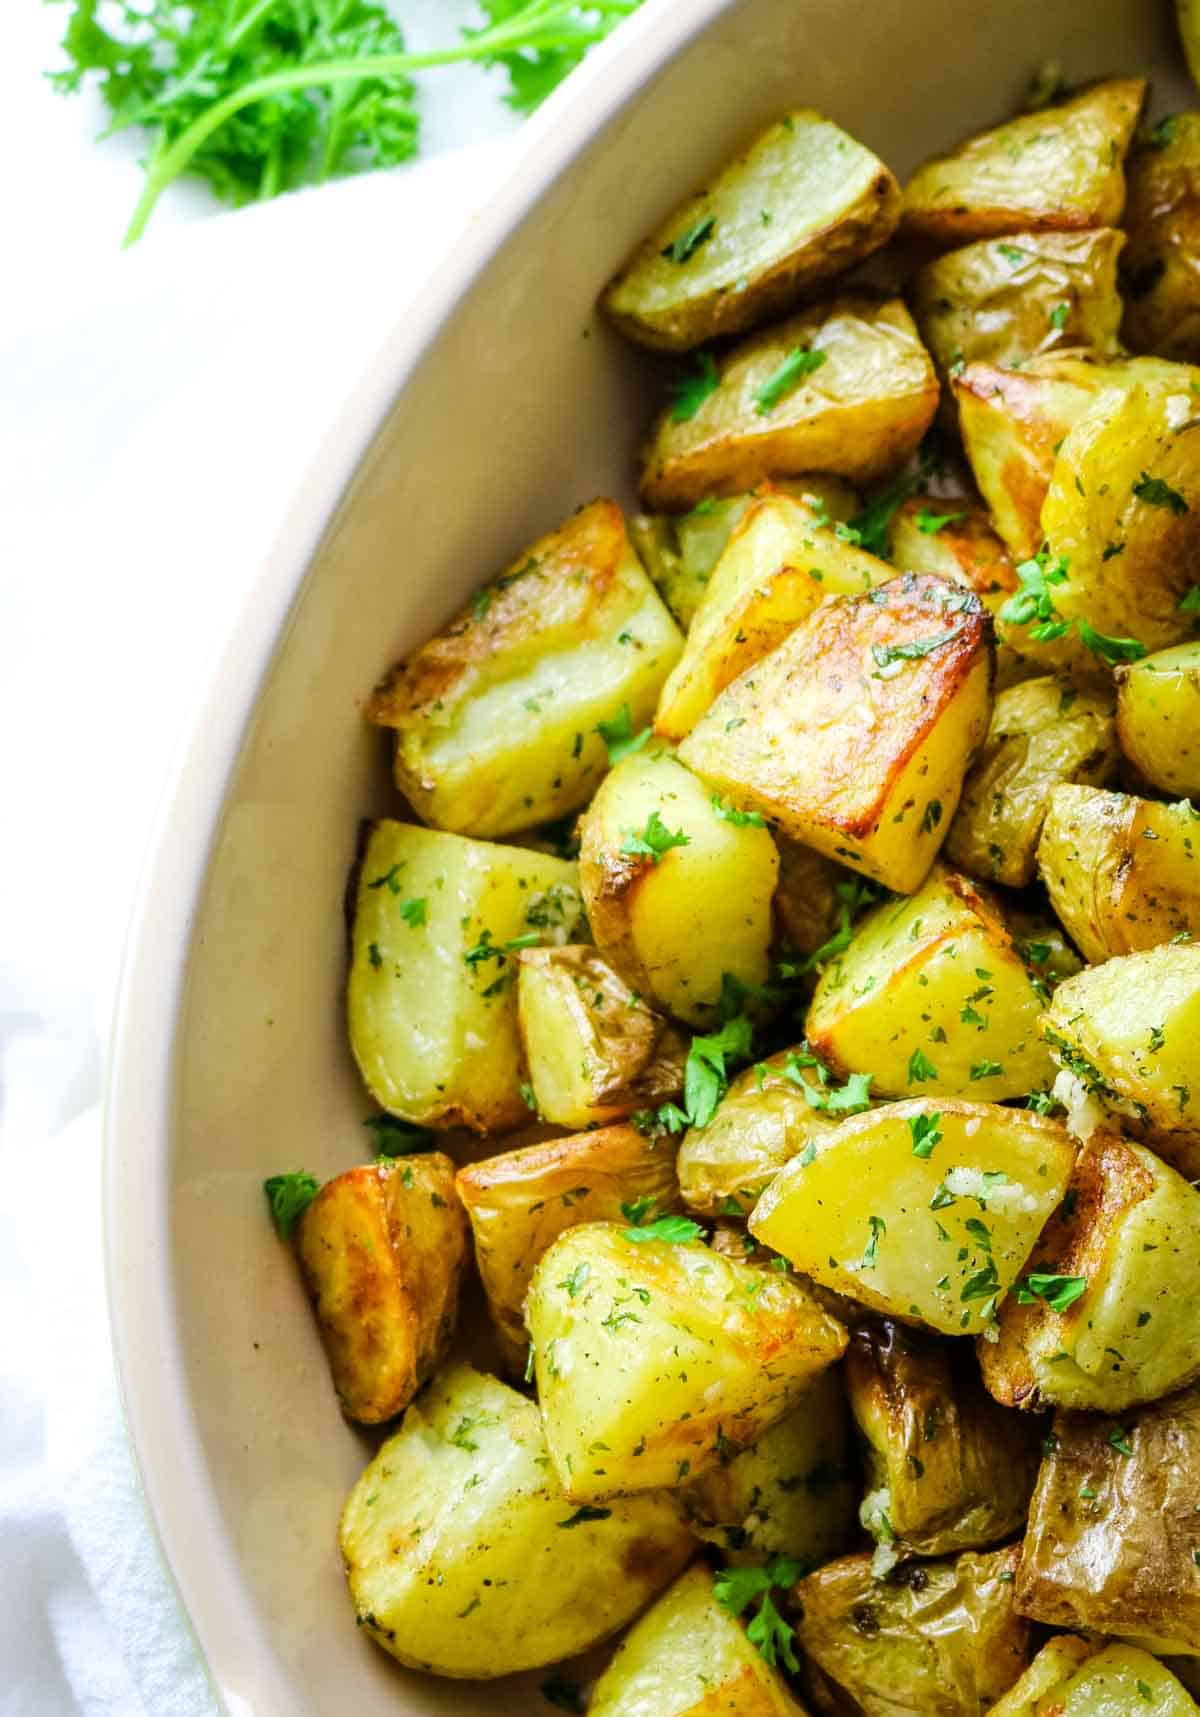 roasted potatoes with golden edges in platter.